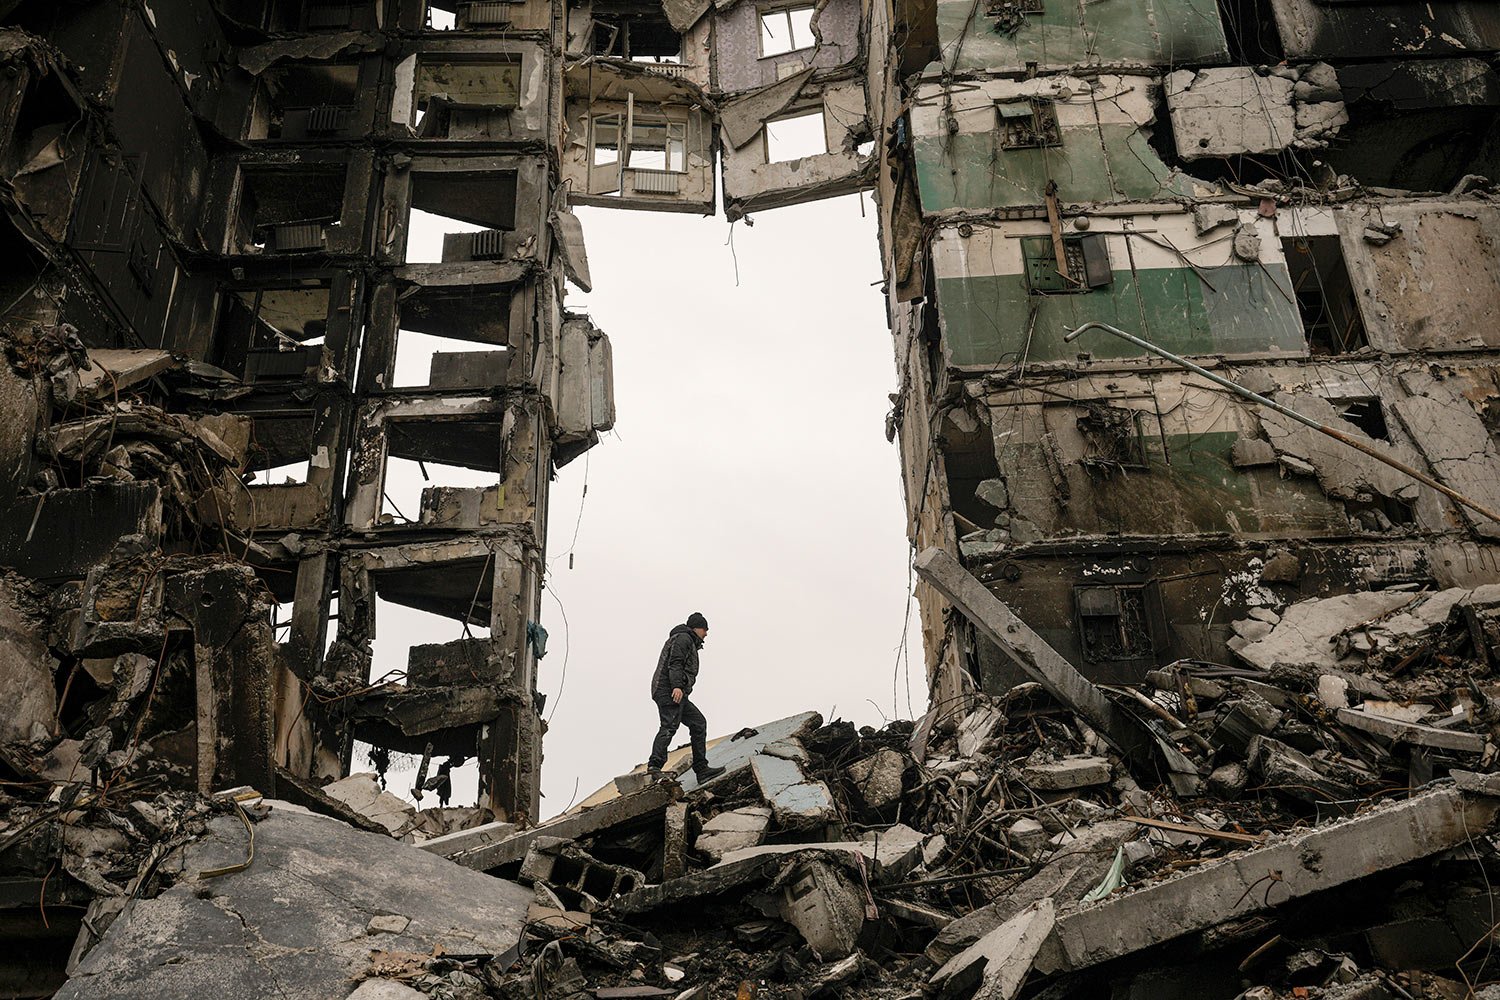  A resident looks for belongings in an apartment building destroyed during fighting between Ukrainian and Russian forces in Borodyanka, Ukraine, Tuesday, April 5, 2022. (AP Photo/Vadim Ghirda) 